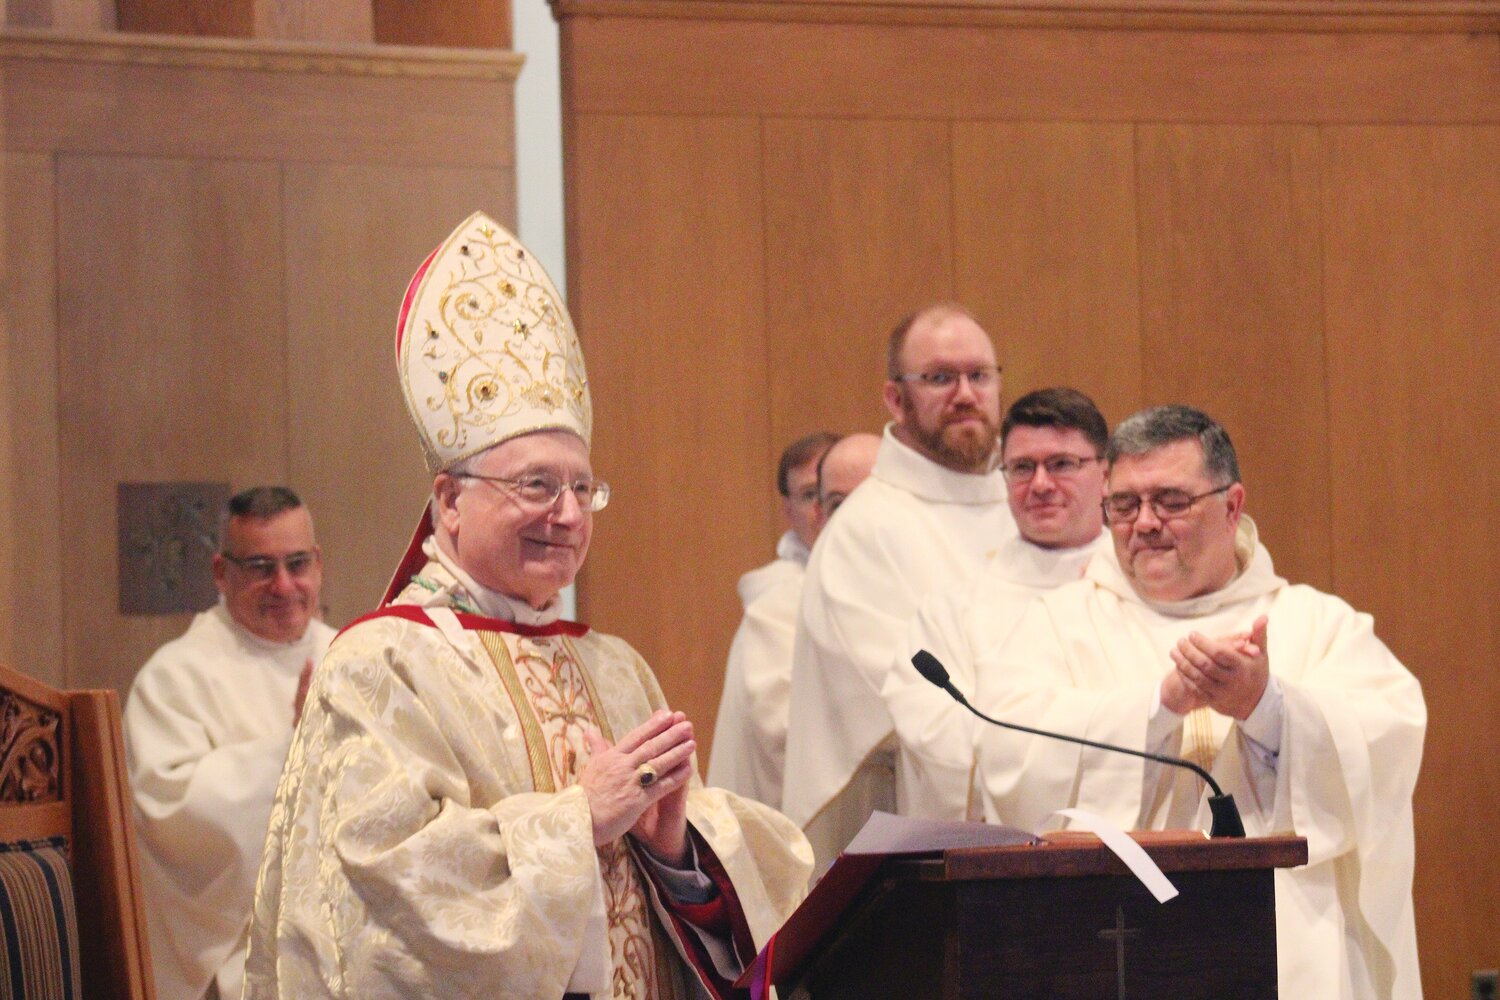 The Most Reverend Robert C. Evans, former Auxiliary Bishop of Providence, observed the Golden Jubilee of his priestly ordination by celebrating Holy Mass at Our Lady of Mercy Church, East Greenwich, on Sunday, July 2.